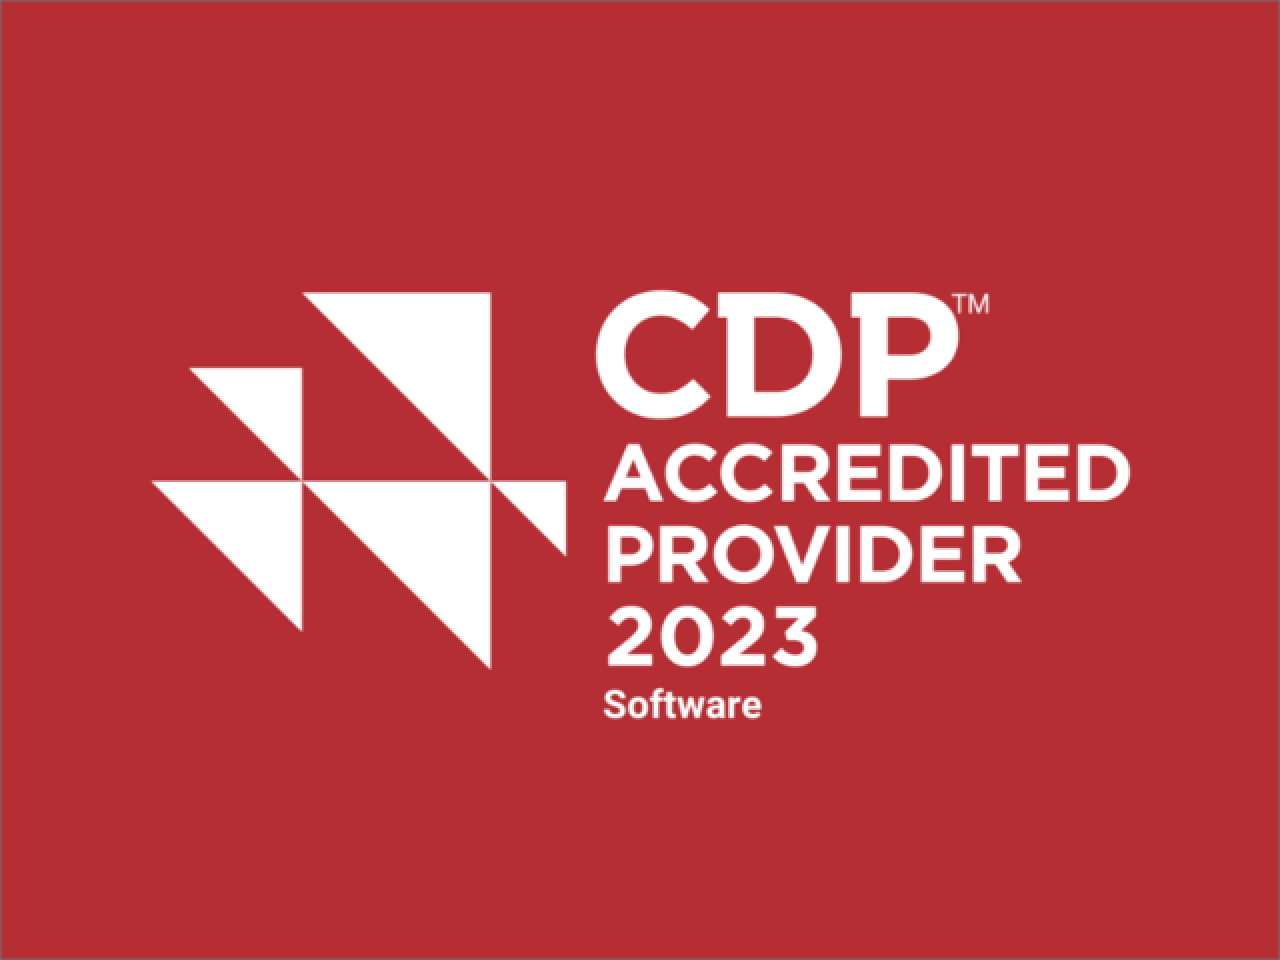 FigBytes is a CDP accredited provider